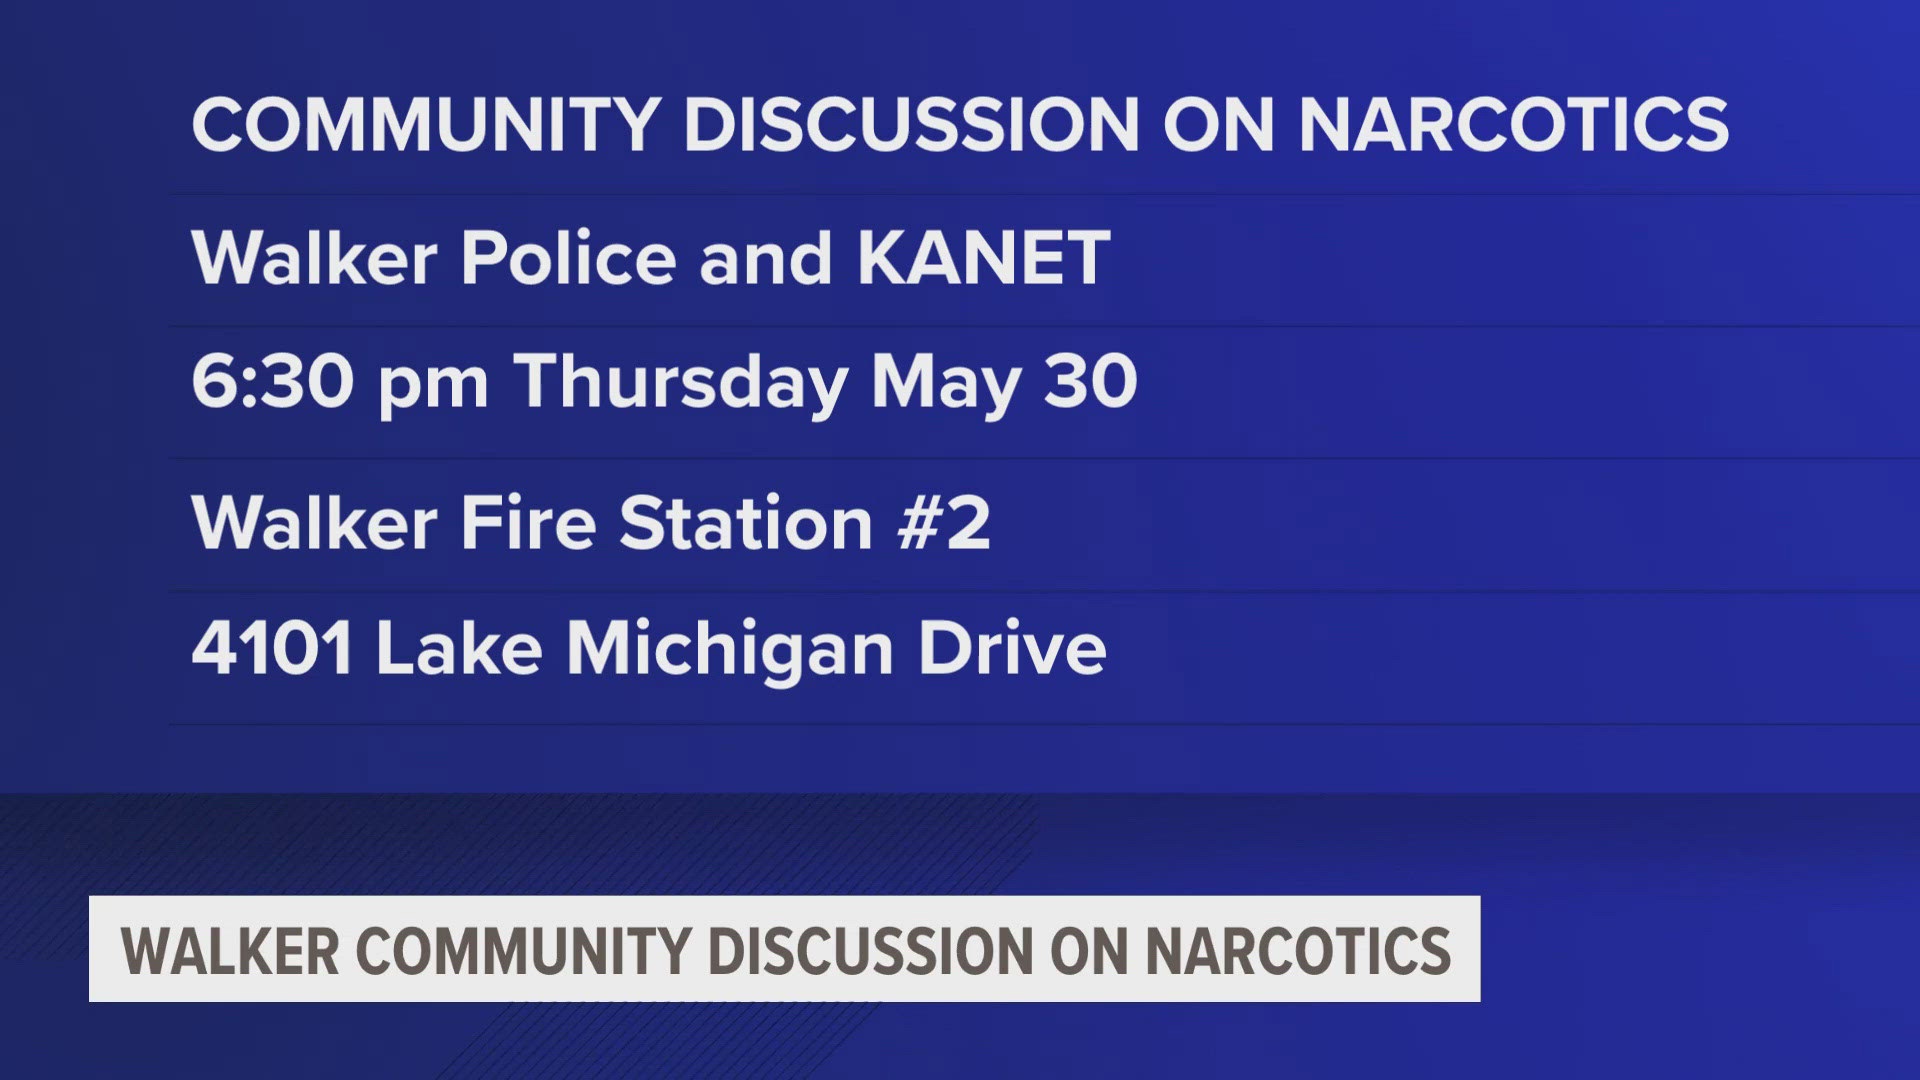 Walker Police are inviting you to hear a discussion about narcotics and what to do about it on Thursday.